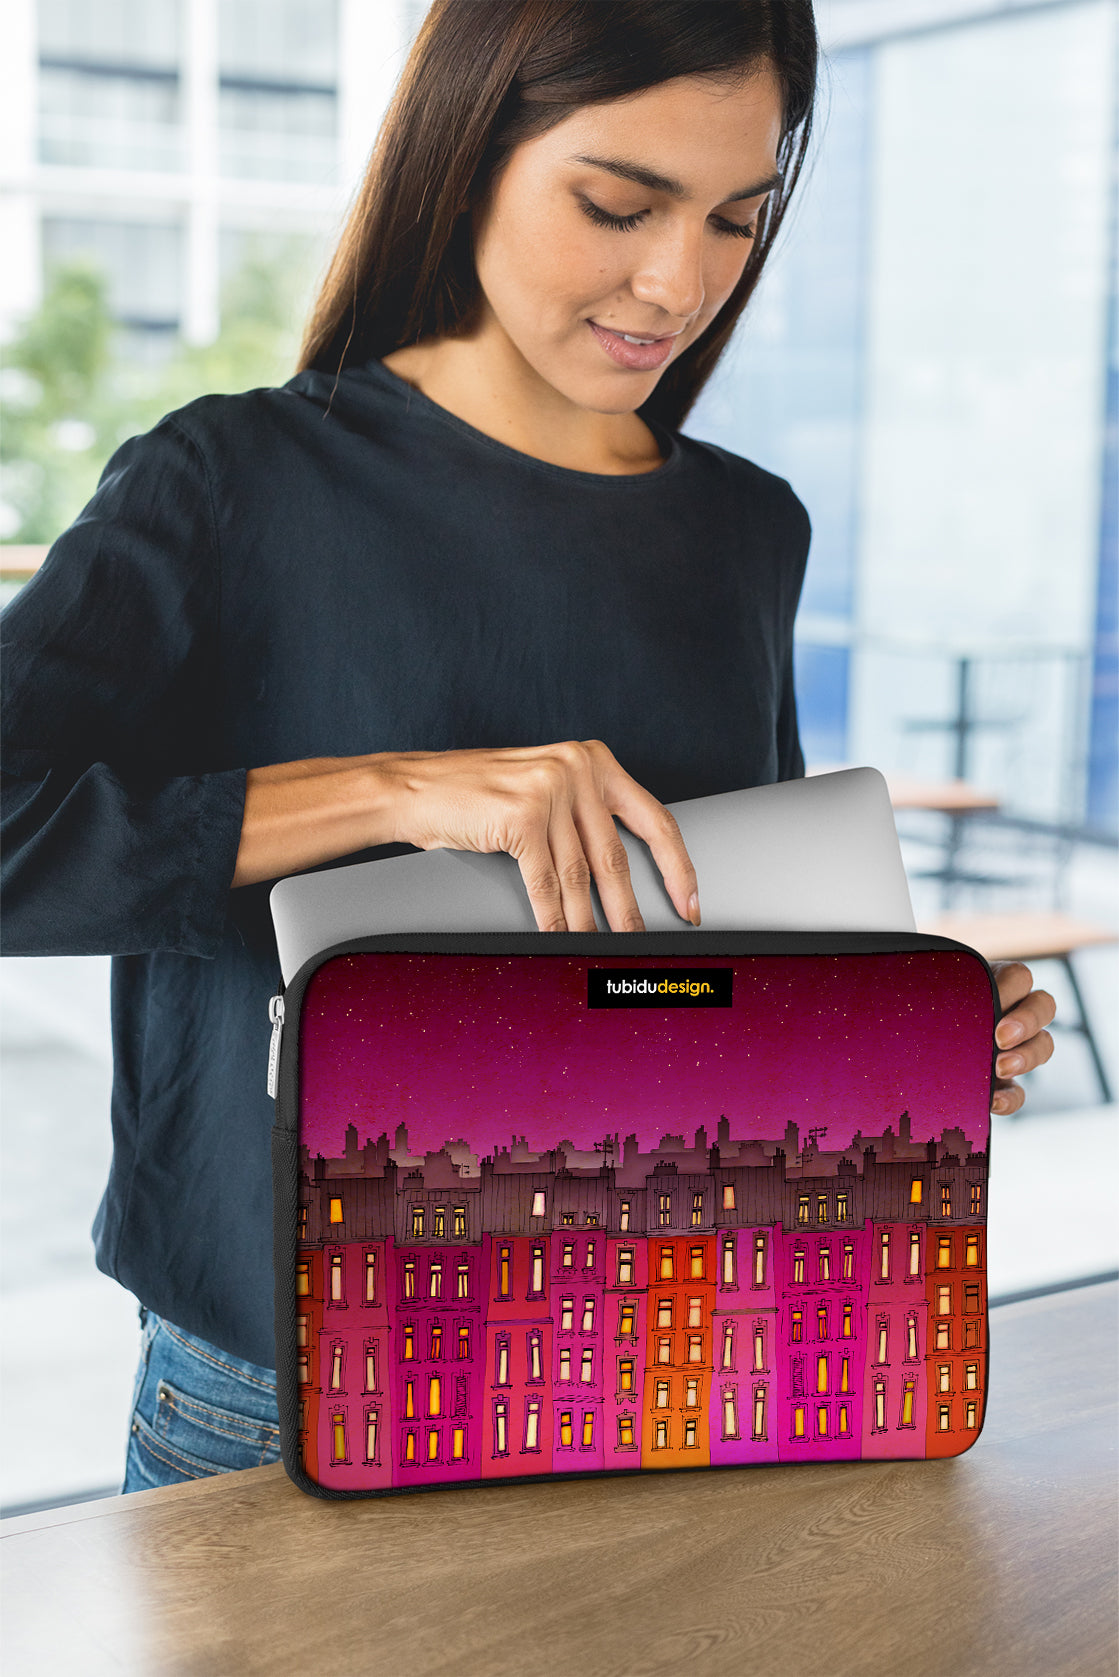 Paris Red facade - Illustrated Laptop Sleeve